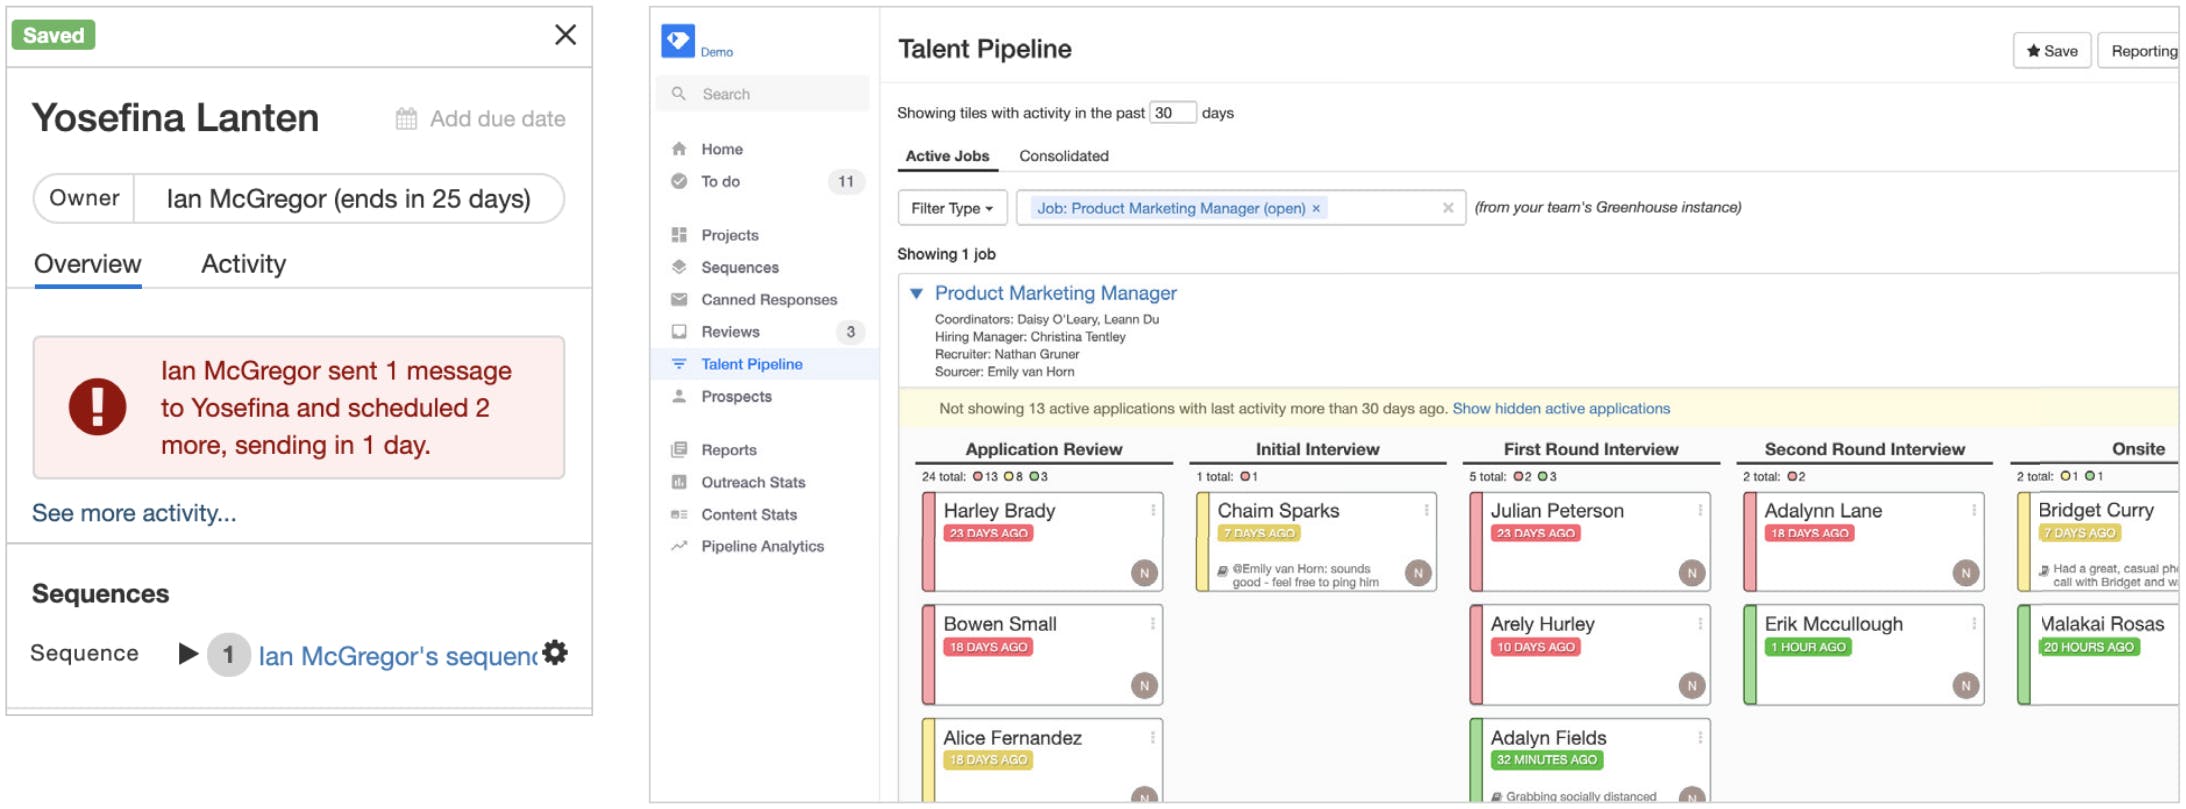 Talent Pipeline Candidate Management